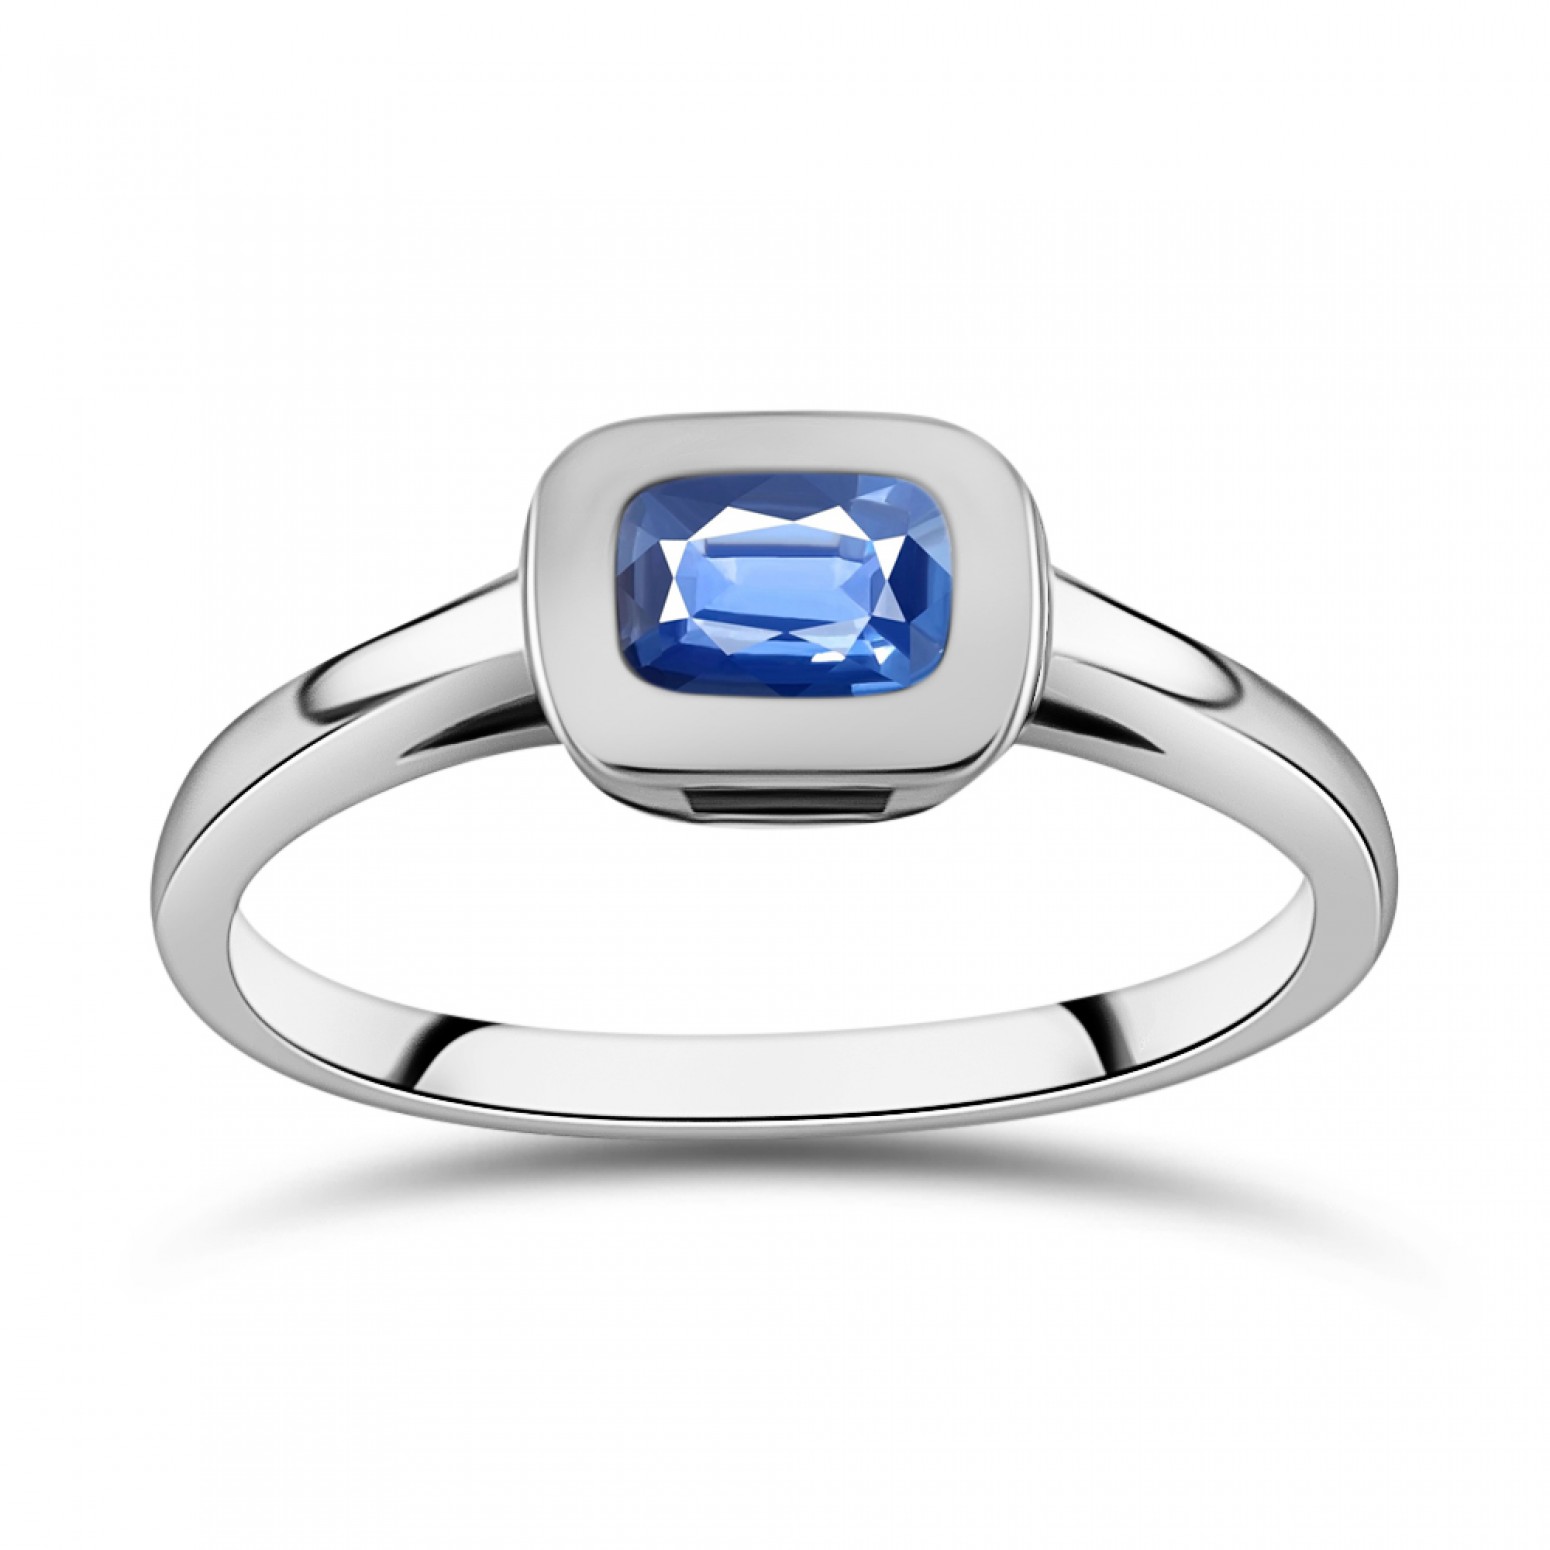 Solitaire ring 18K white gold with sapphire 0.65ct, da4192 ENGAGEMENT RINGS Κοσμηματα - chrilia.gr